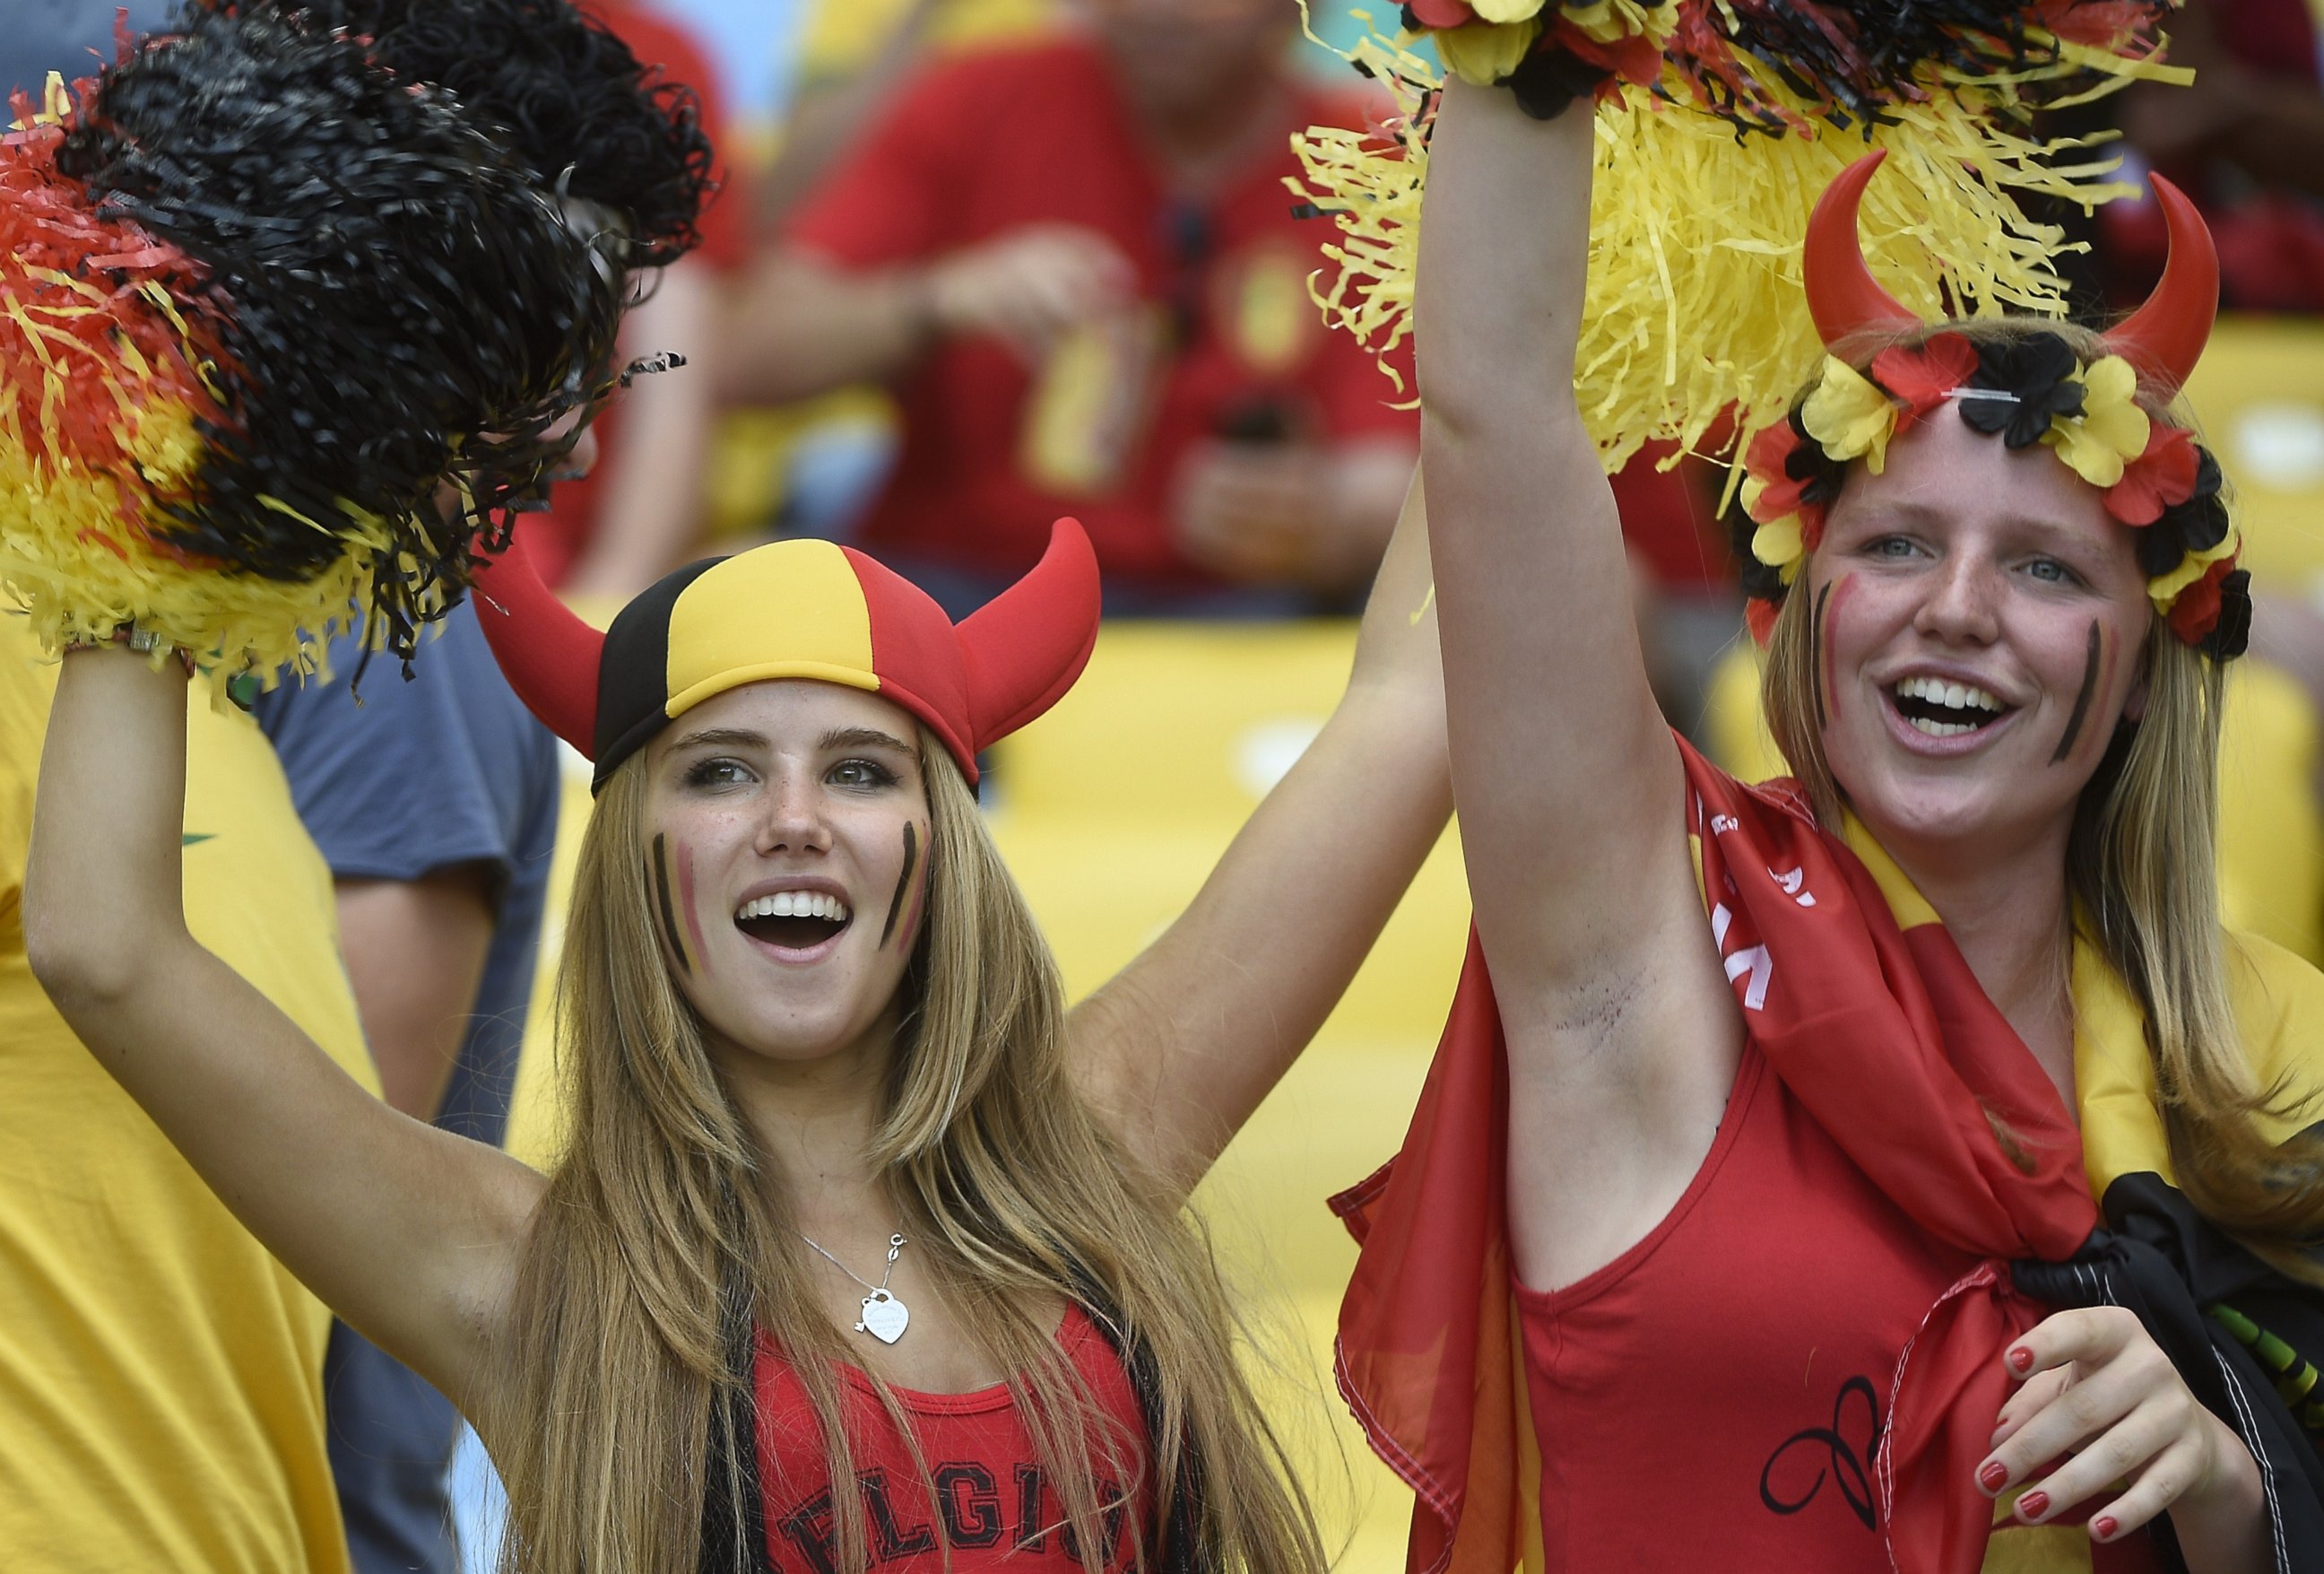 PHOTO: Axelle Despiegelaere, a Belgium supporter cheers with her friend as they wait for the start of the Group H football match between Belgium and Russia at the Maracana Stadium in Rio de Janeiro during the 2014 FIFA World Cup on June 22, 2014.  